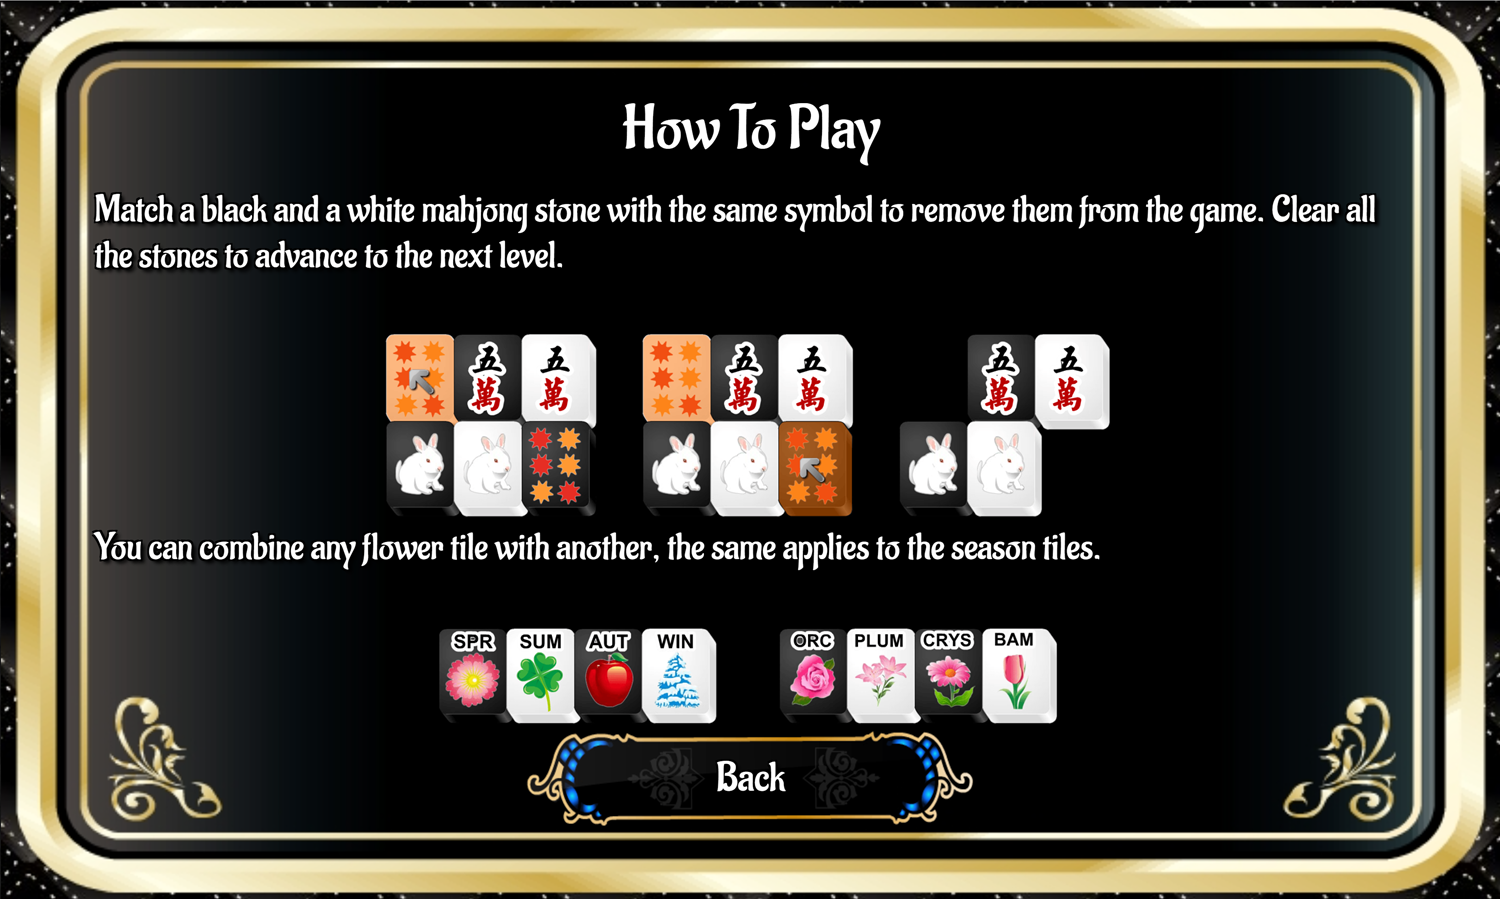 Mahjong Black and White 2 Untimed Game How to Play Screen Screenshot.